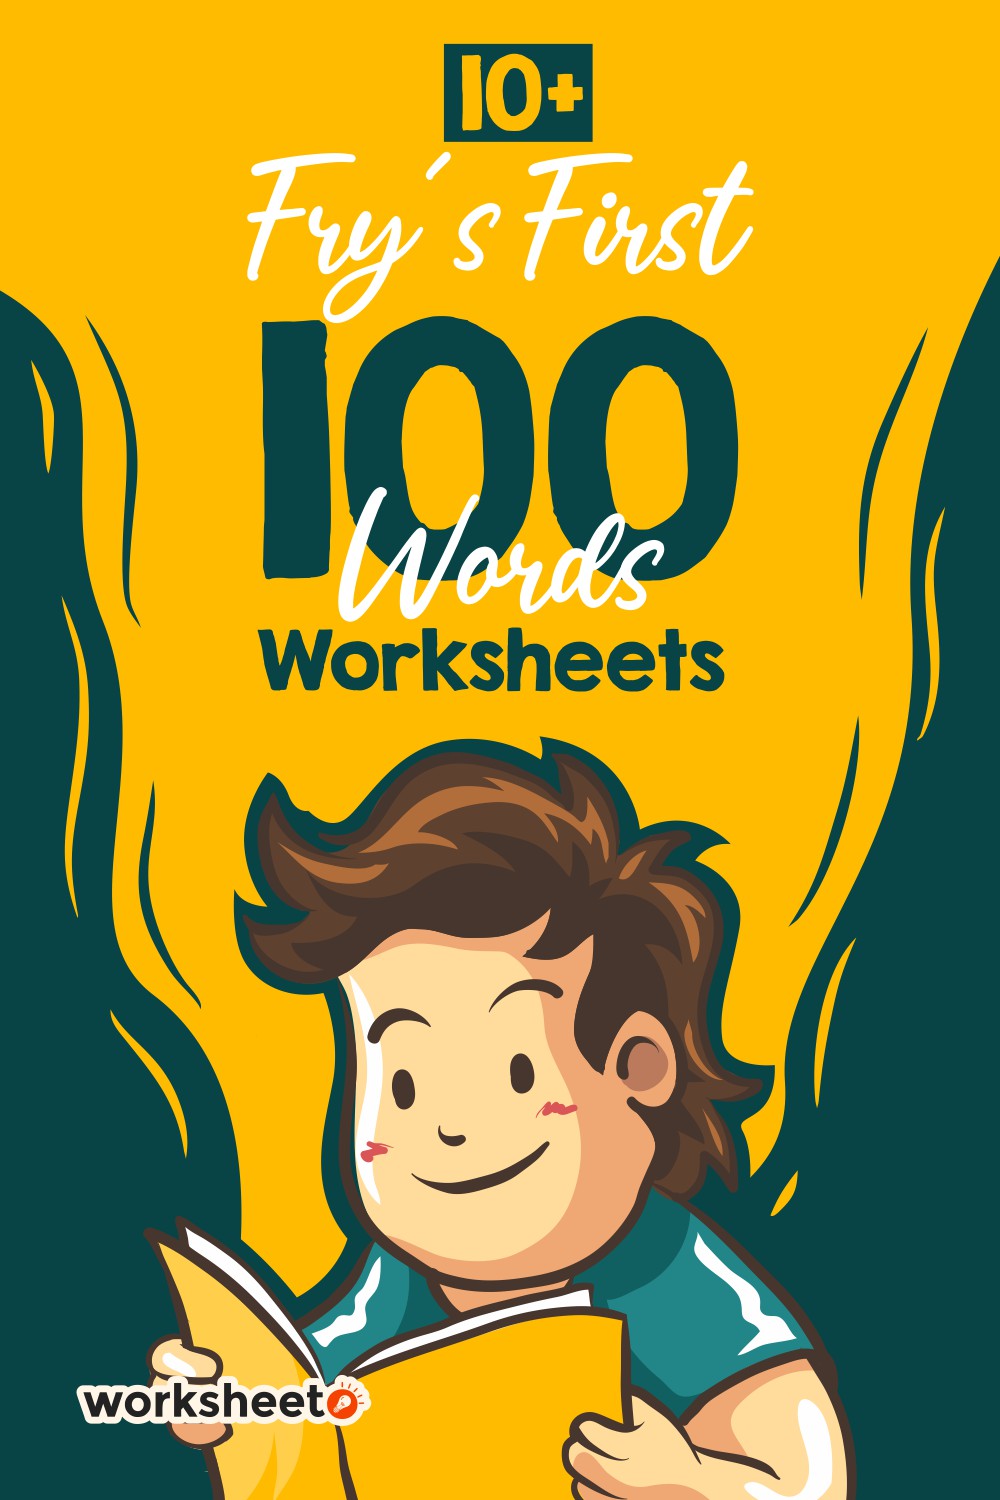 Frys First 100 Words Worksheets